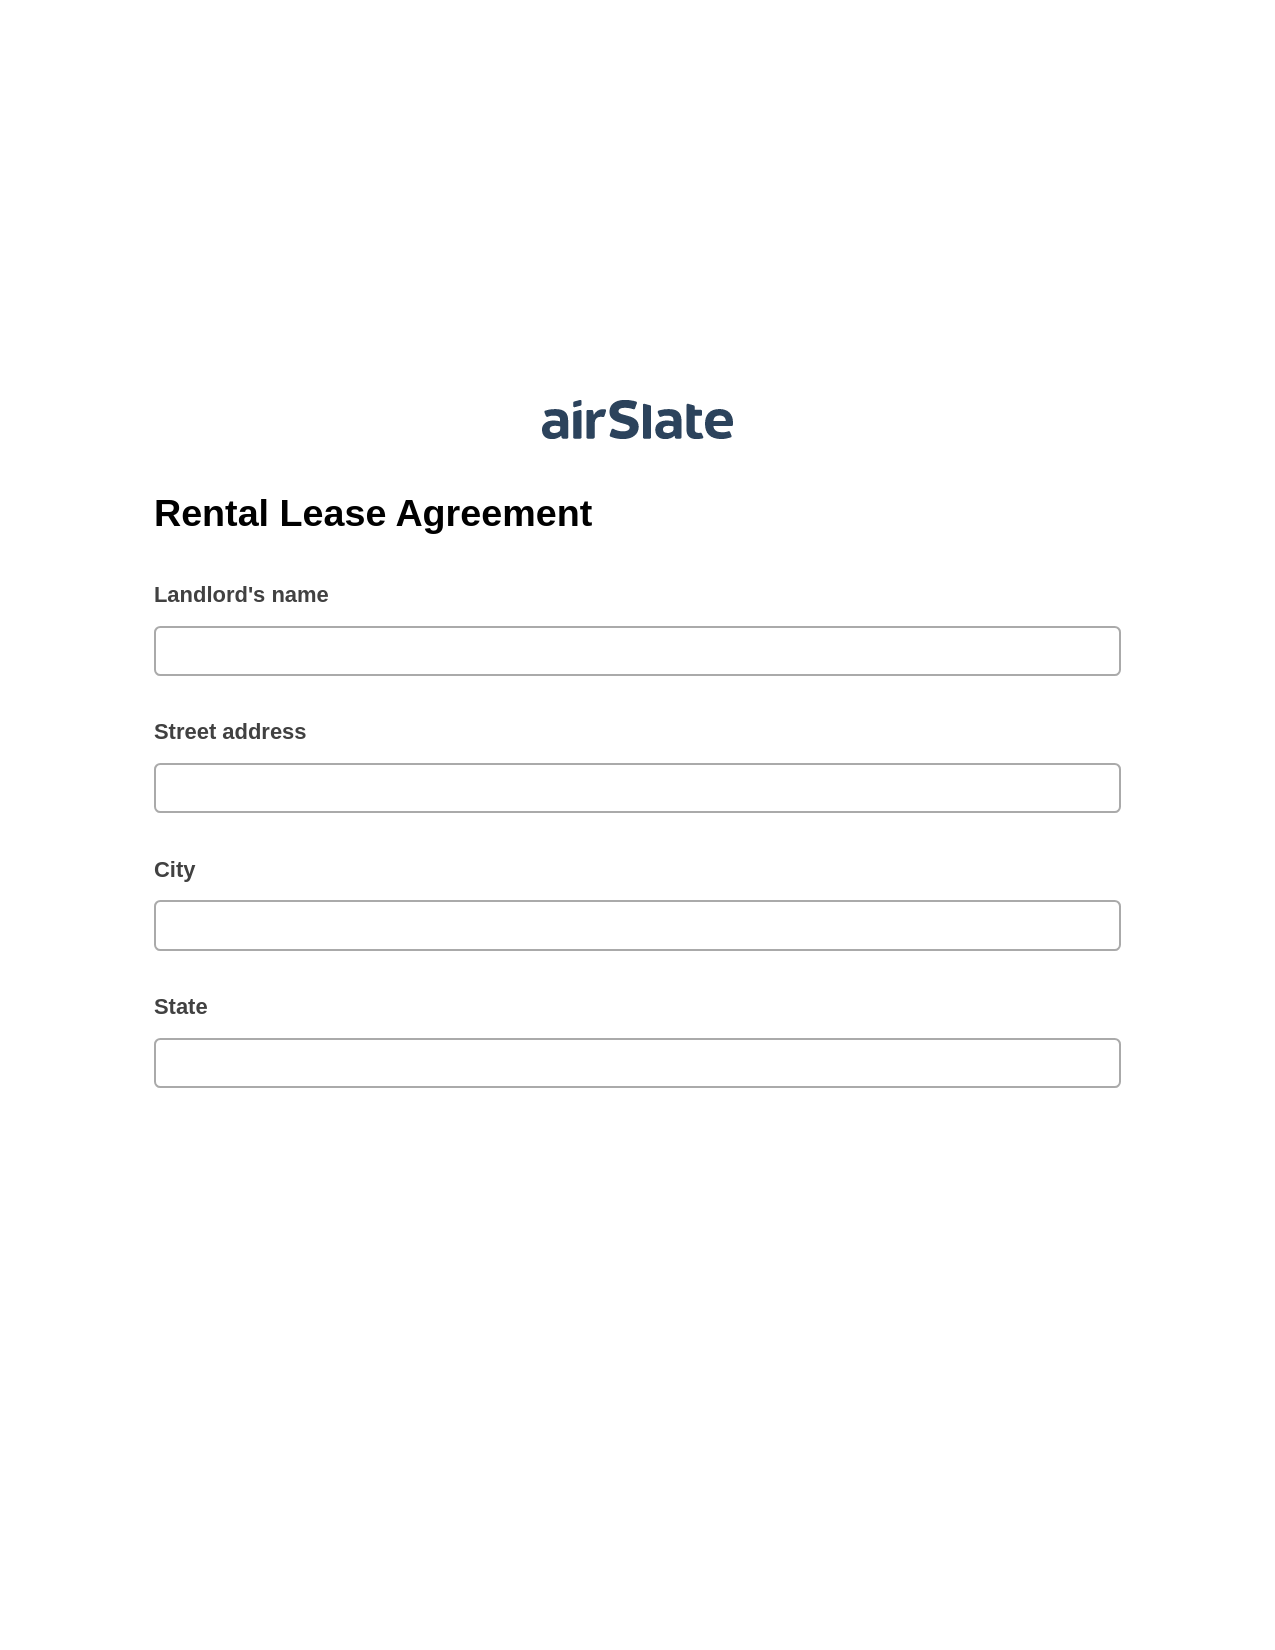 Rental Lease Agreement Pre-fill Dropdown from Airtable, Document Hide Bot, Webhook Postfinish Bot